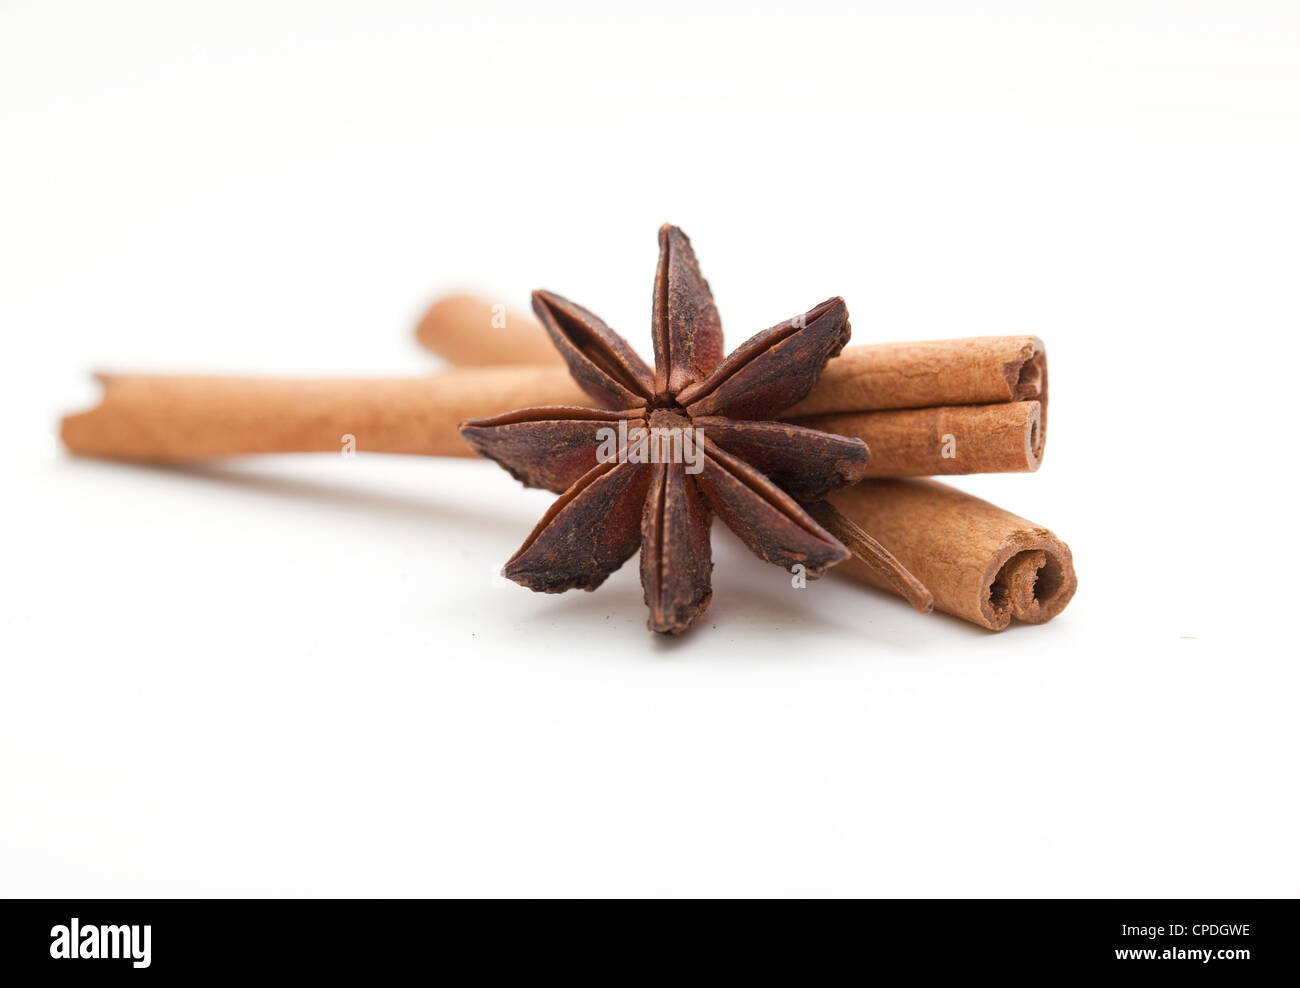 Cinnamon sticks with anise star on white background Stock Photo